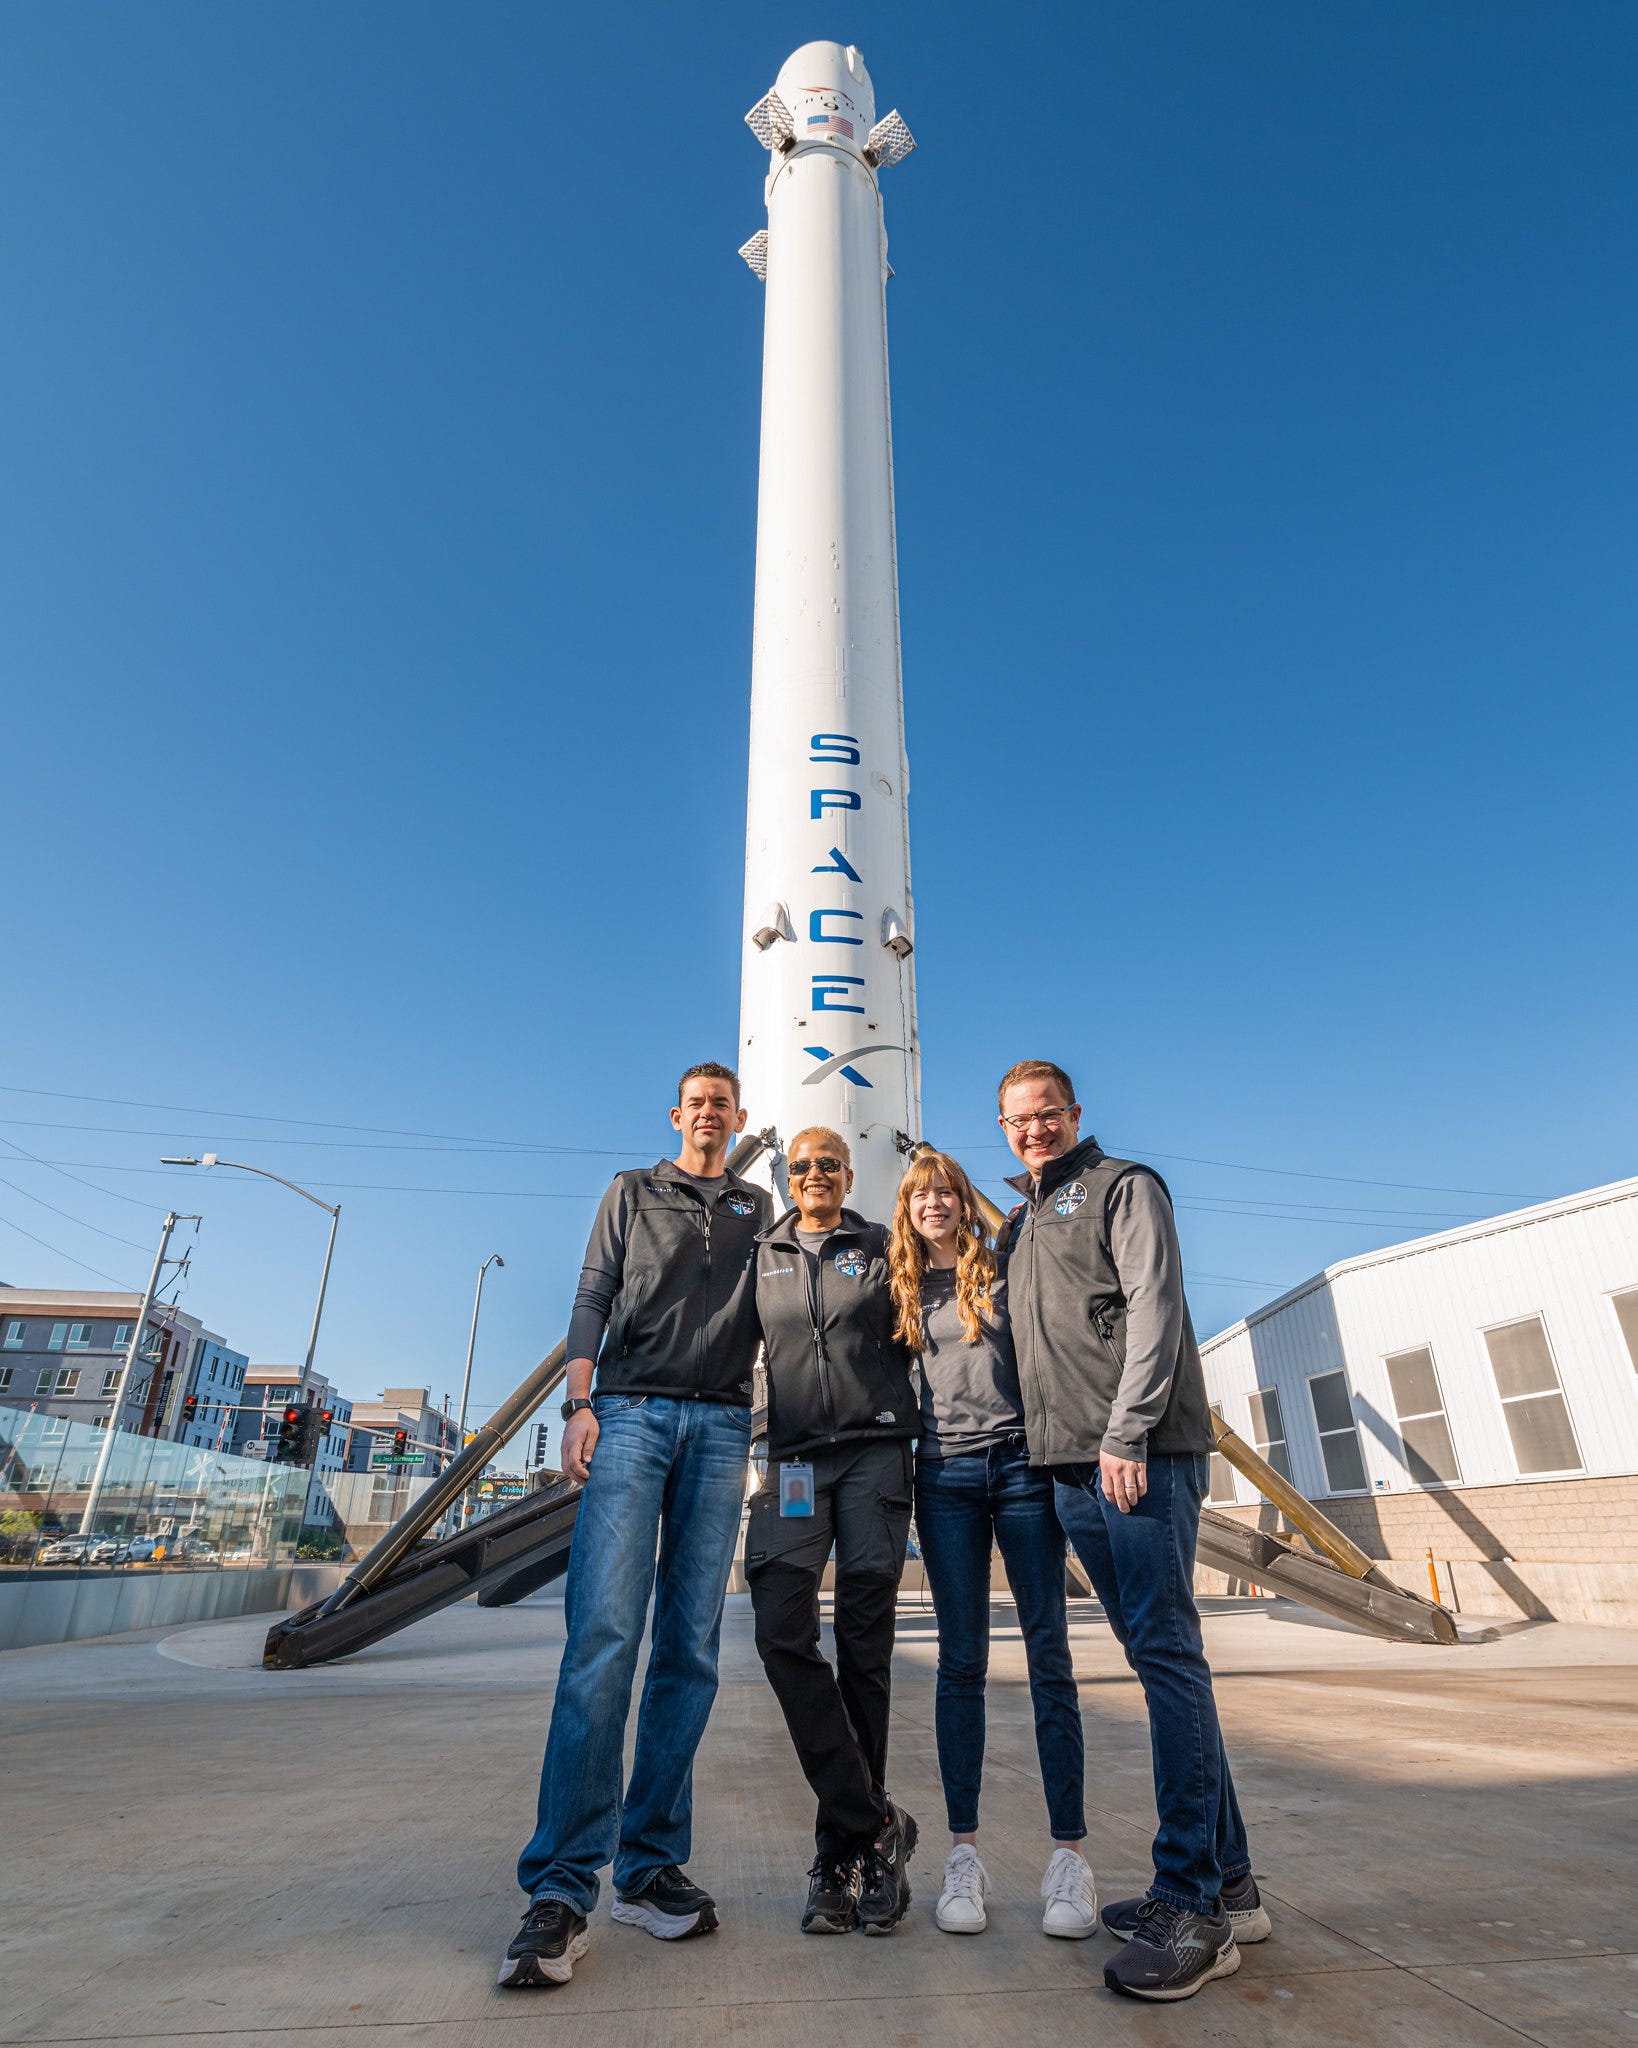 inspiration4 crew pose in front of display falcon 9 rocket